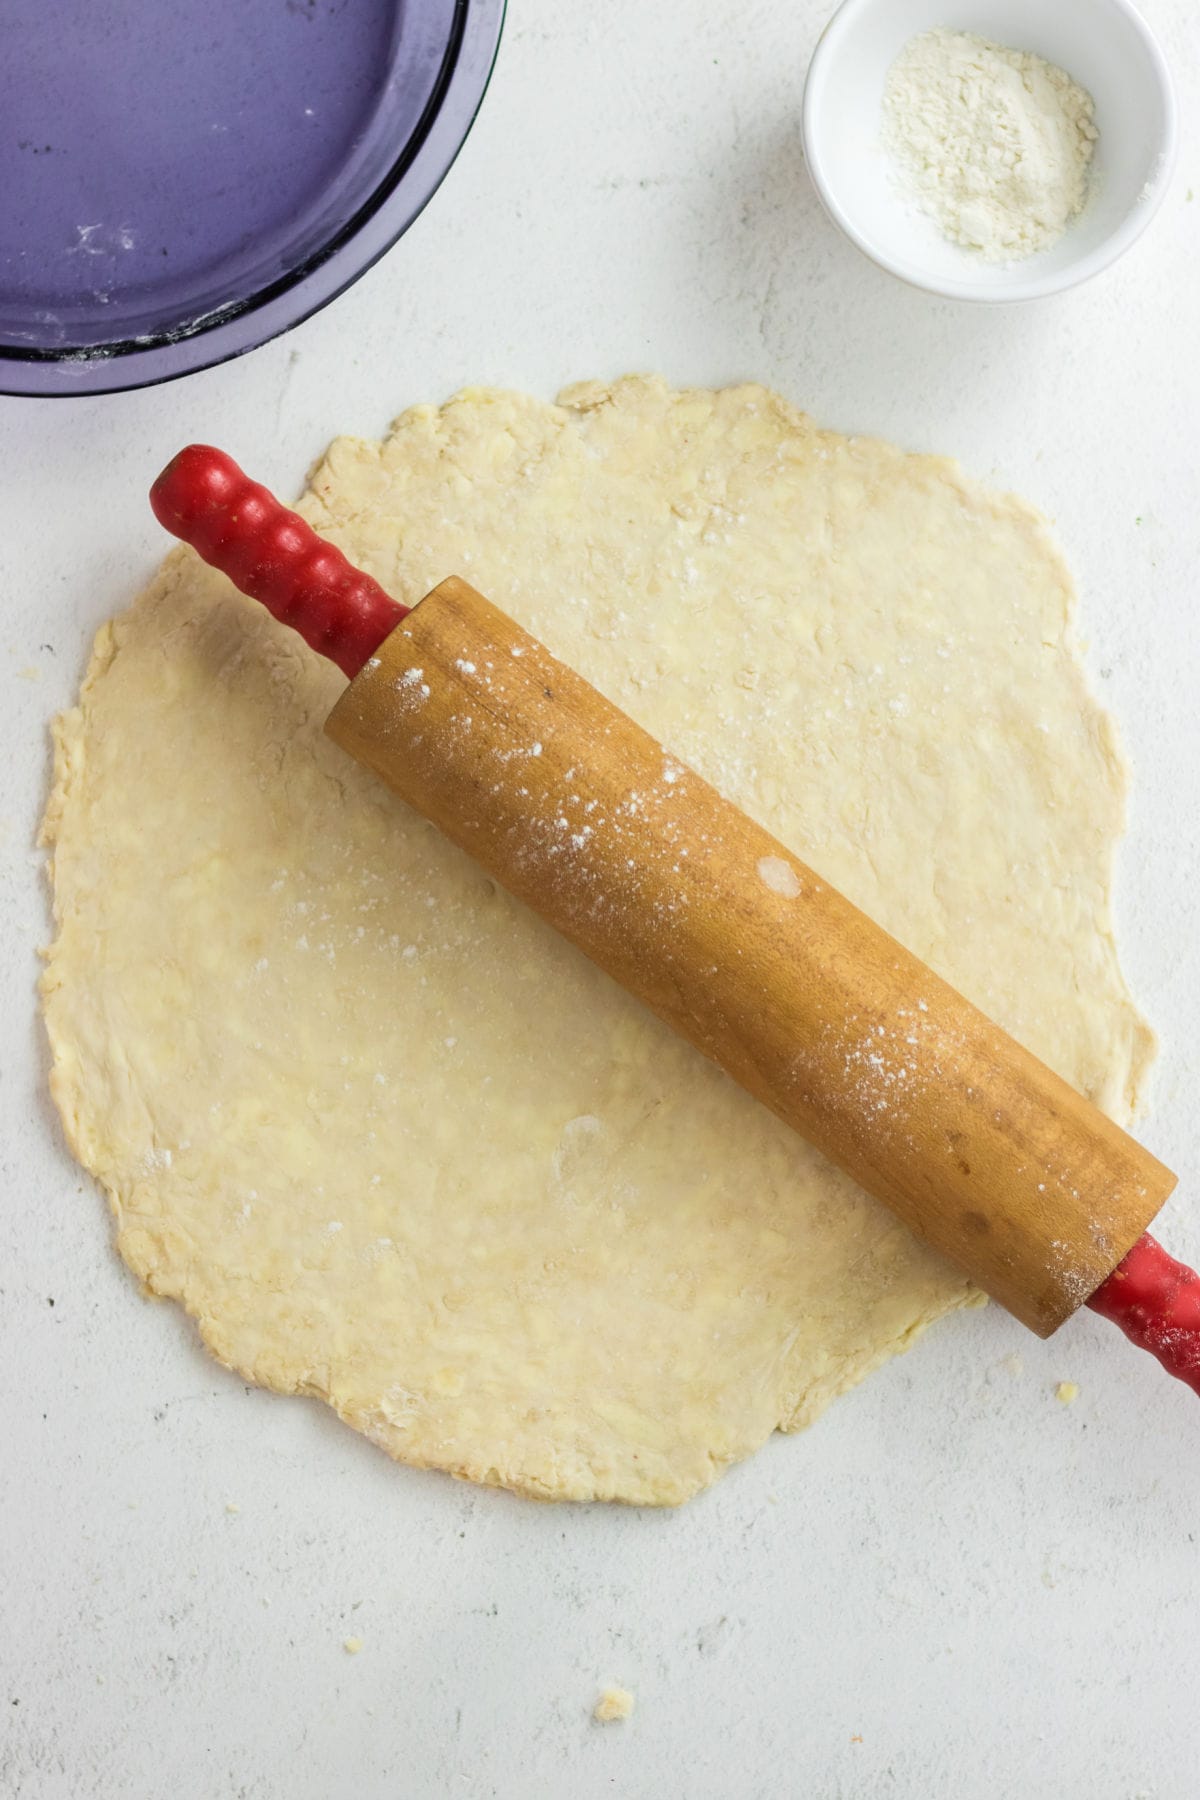 Pie dough being rolled out.